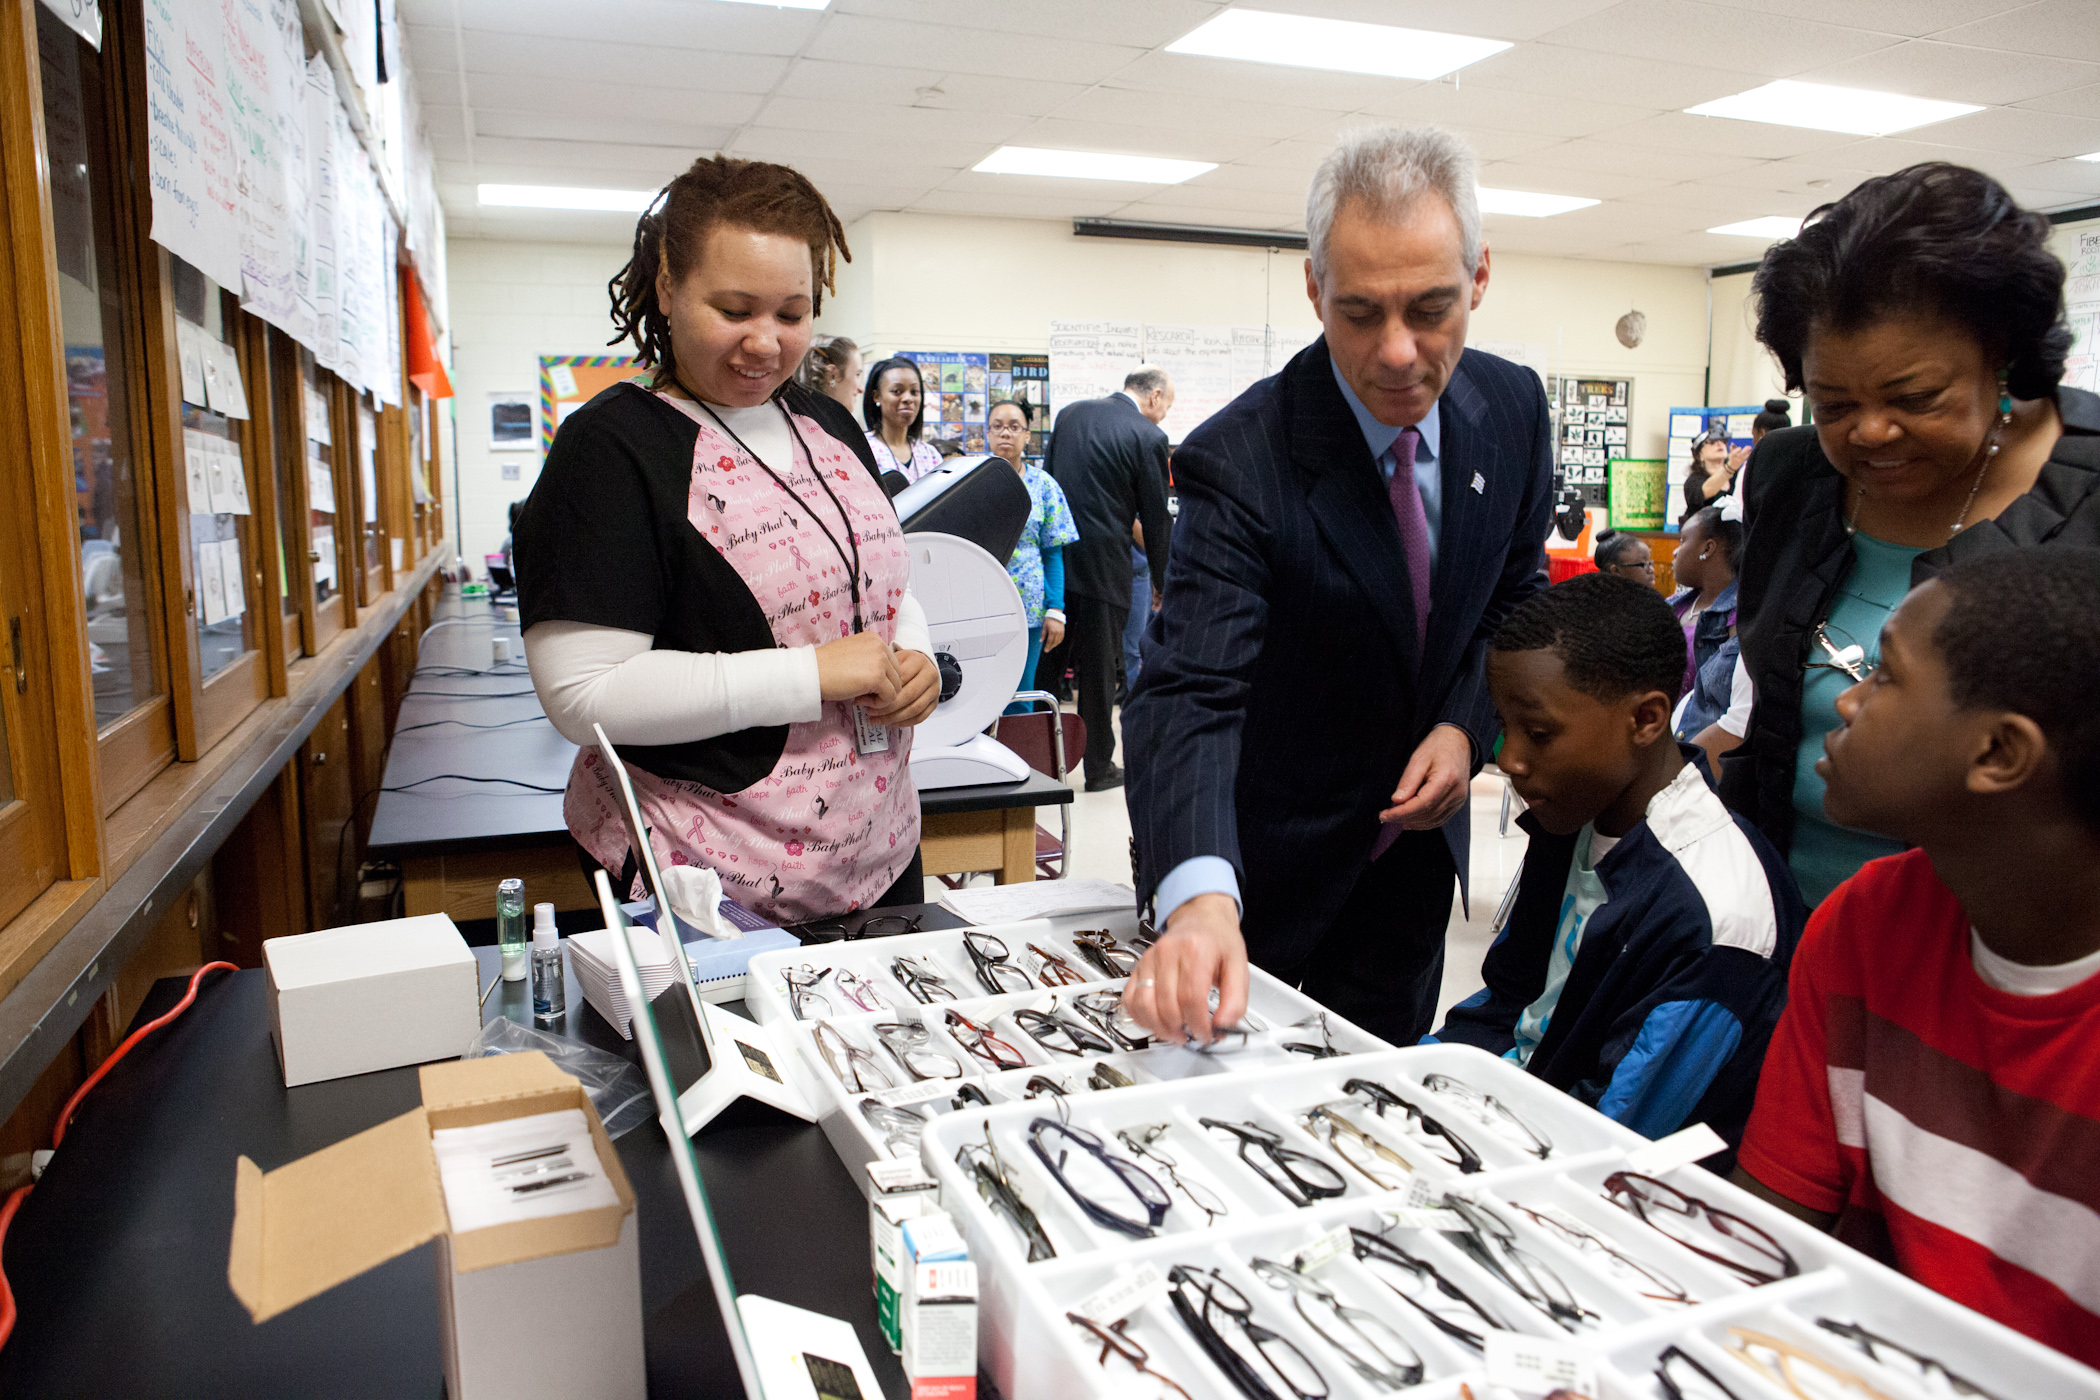 Mayor Emanuel visits with students receiving free vision exams at Sumner Elementary school